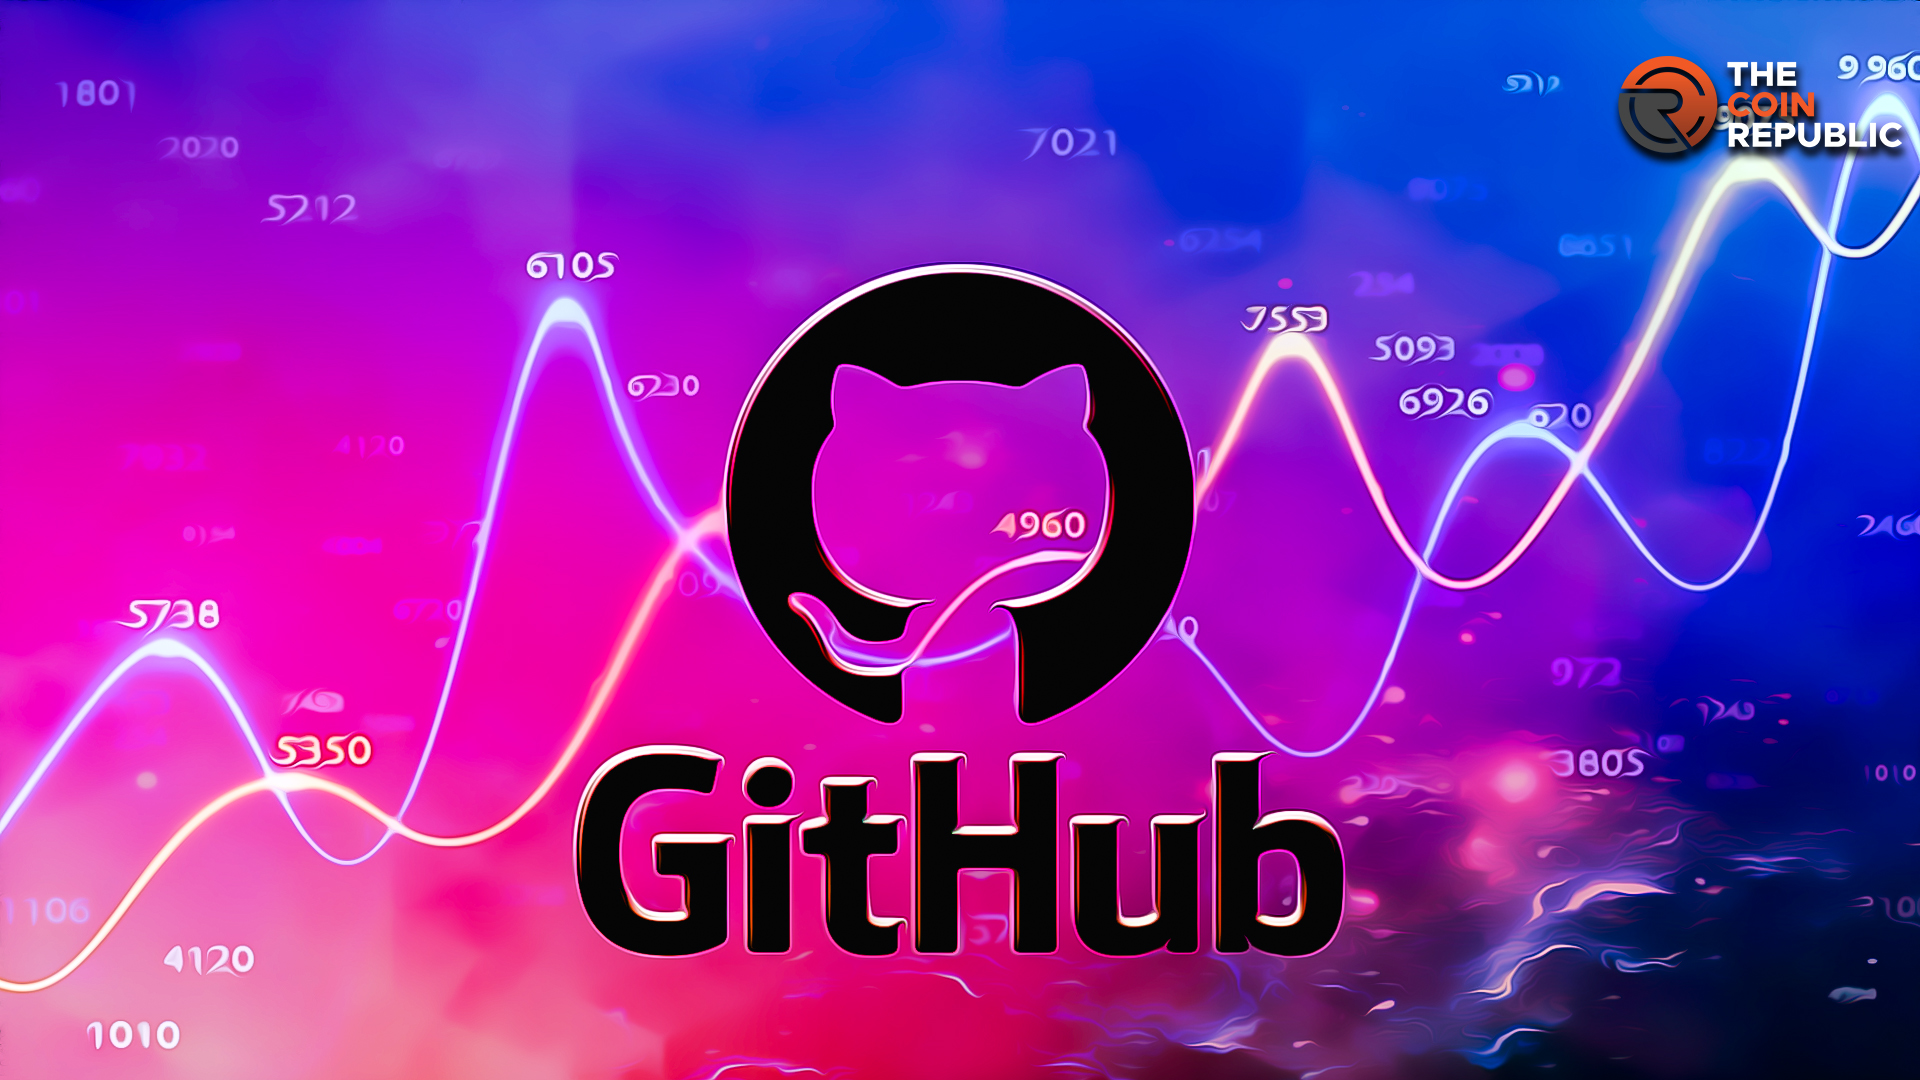 Github: The Overall Working of the Web-Based Graphical Interface